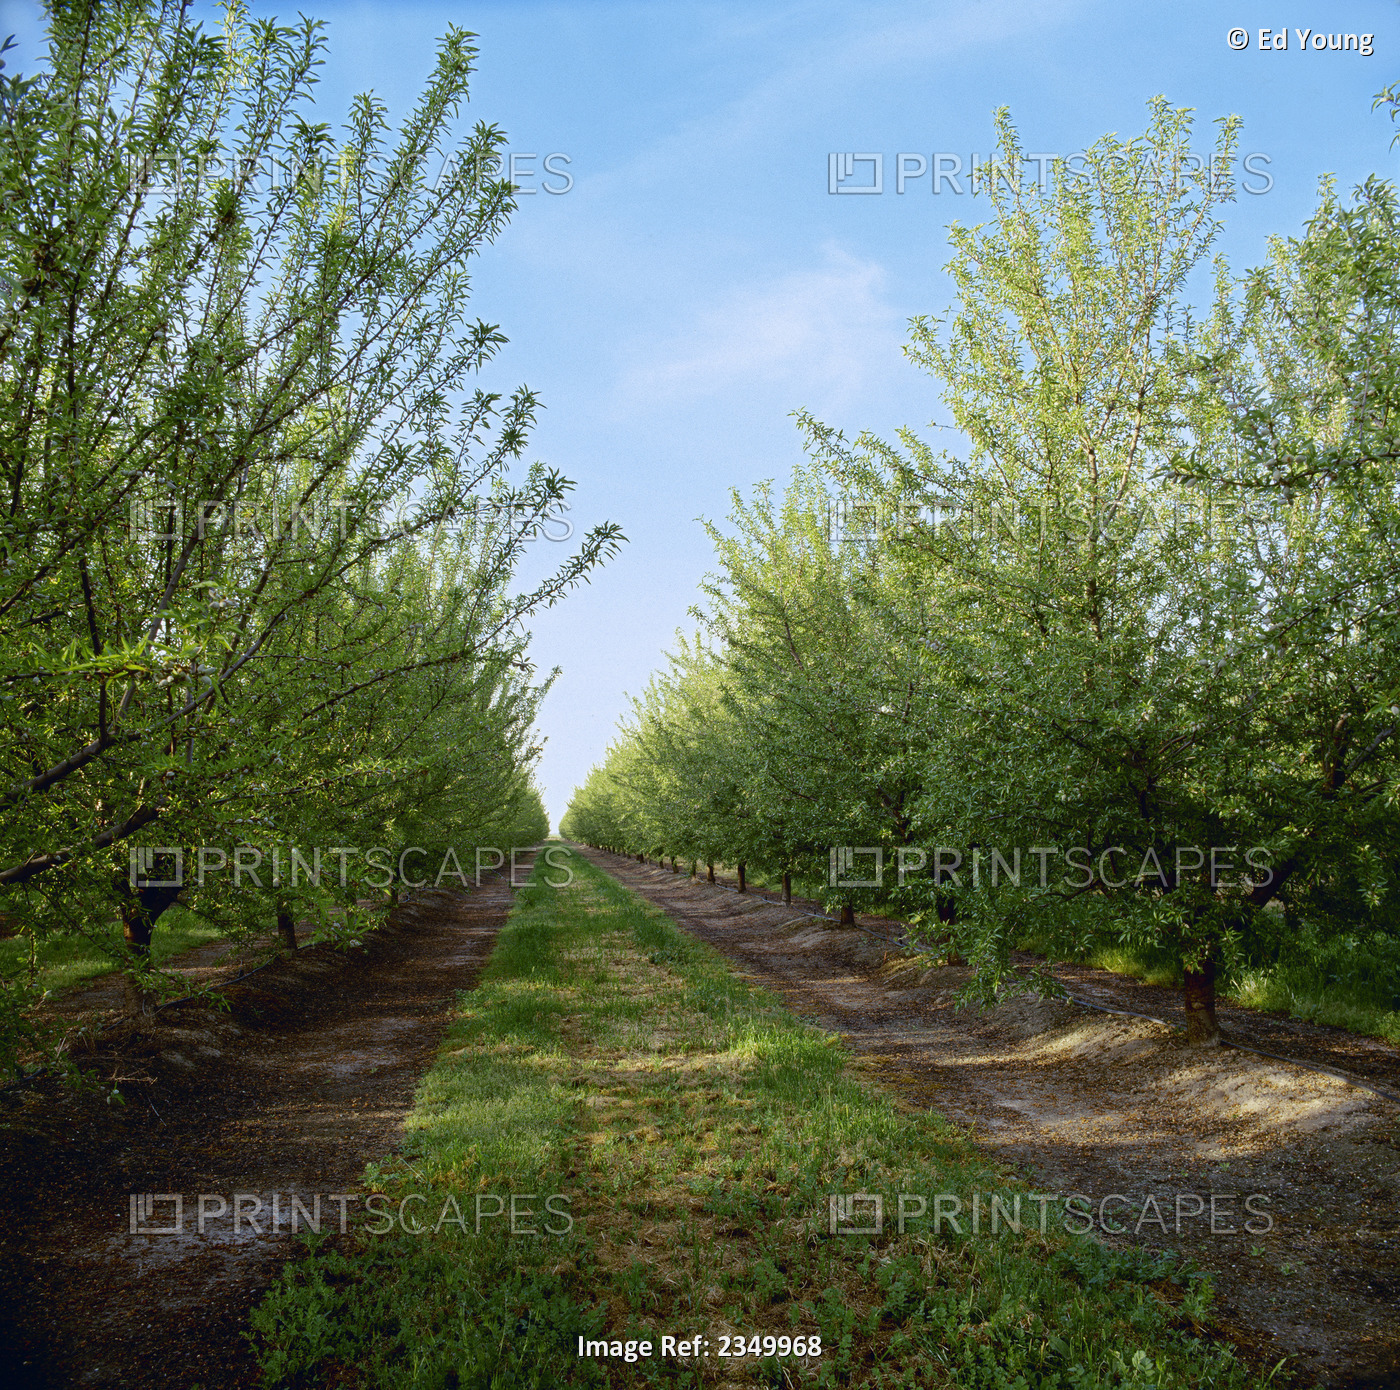 Agriculture - Rows of almond trees in late afternoon light with Spring foliage ...